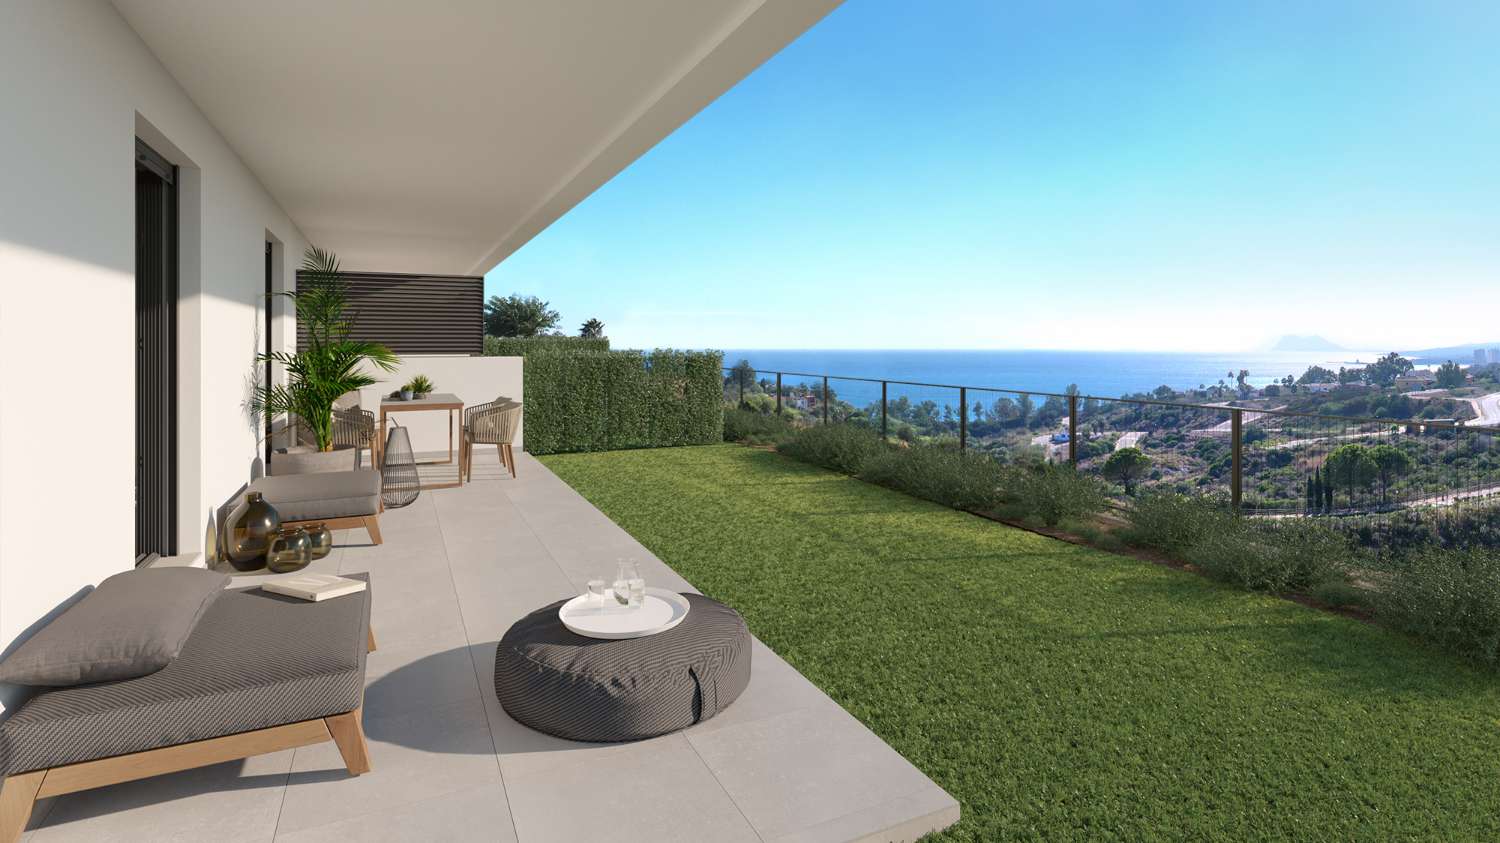 House with Sea View for Sale - Costa del Sol